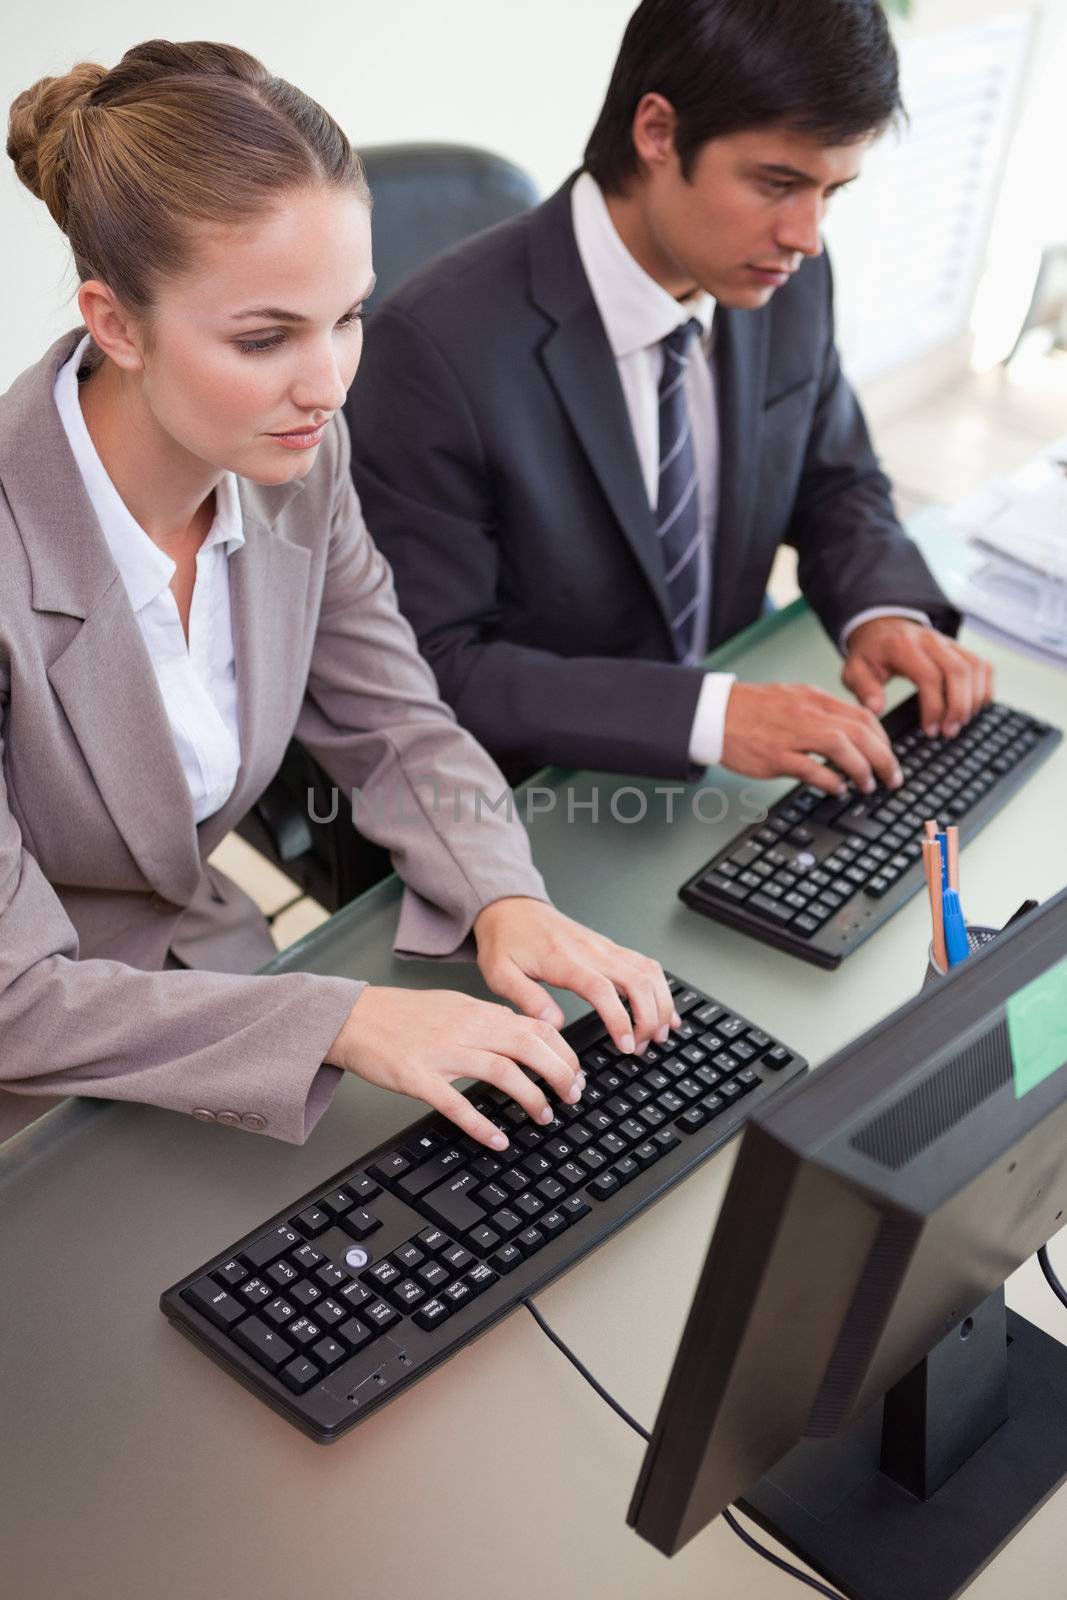 Portrait of business people working with computers in an office